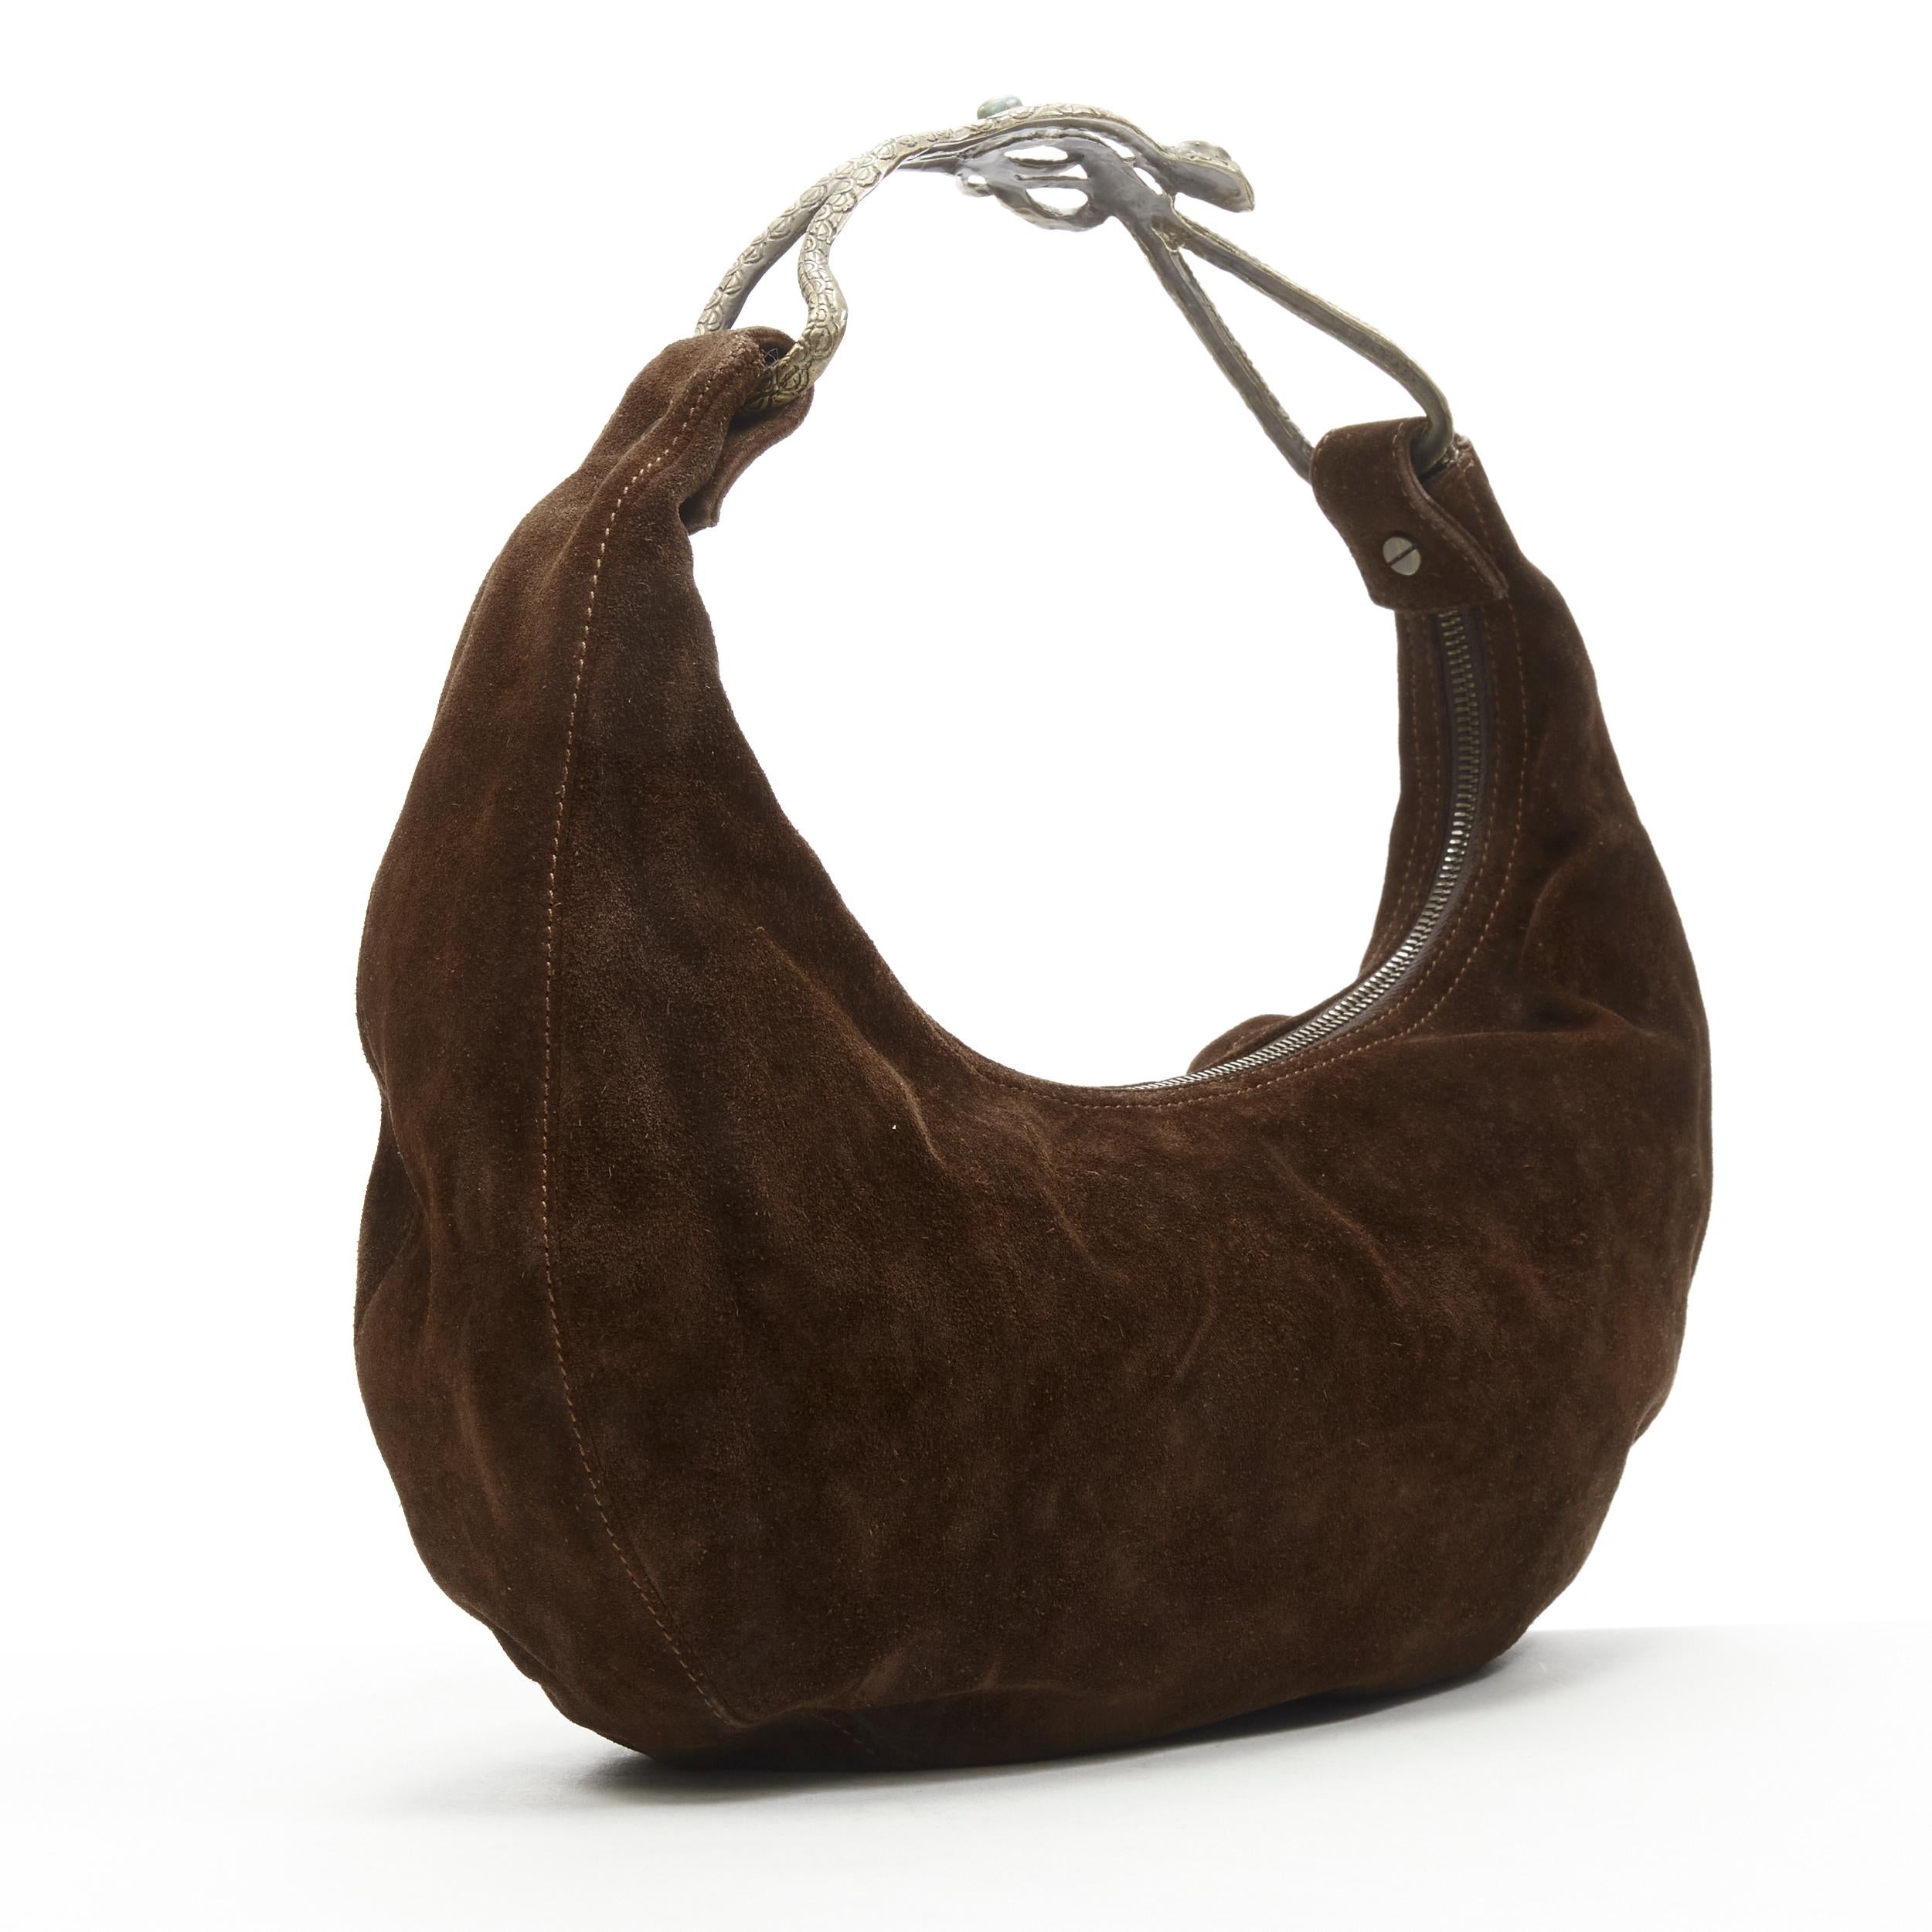 VALENTINO Vintage Y2K brown suede double Serpent metal handle hobo bag
Brand: Valentino
Material: Suede
Color: Brown
Pattern: Solid
Closure: Zip
Extra Detail: Brass gold-tone double twisted Serpent metal handle. Dark brown suede leather upper. Top